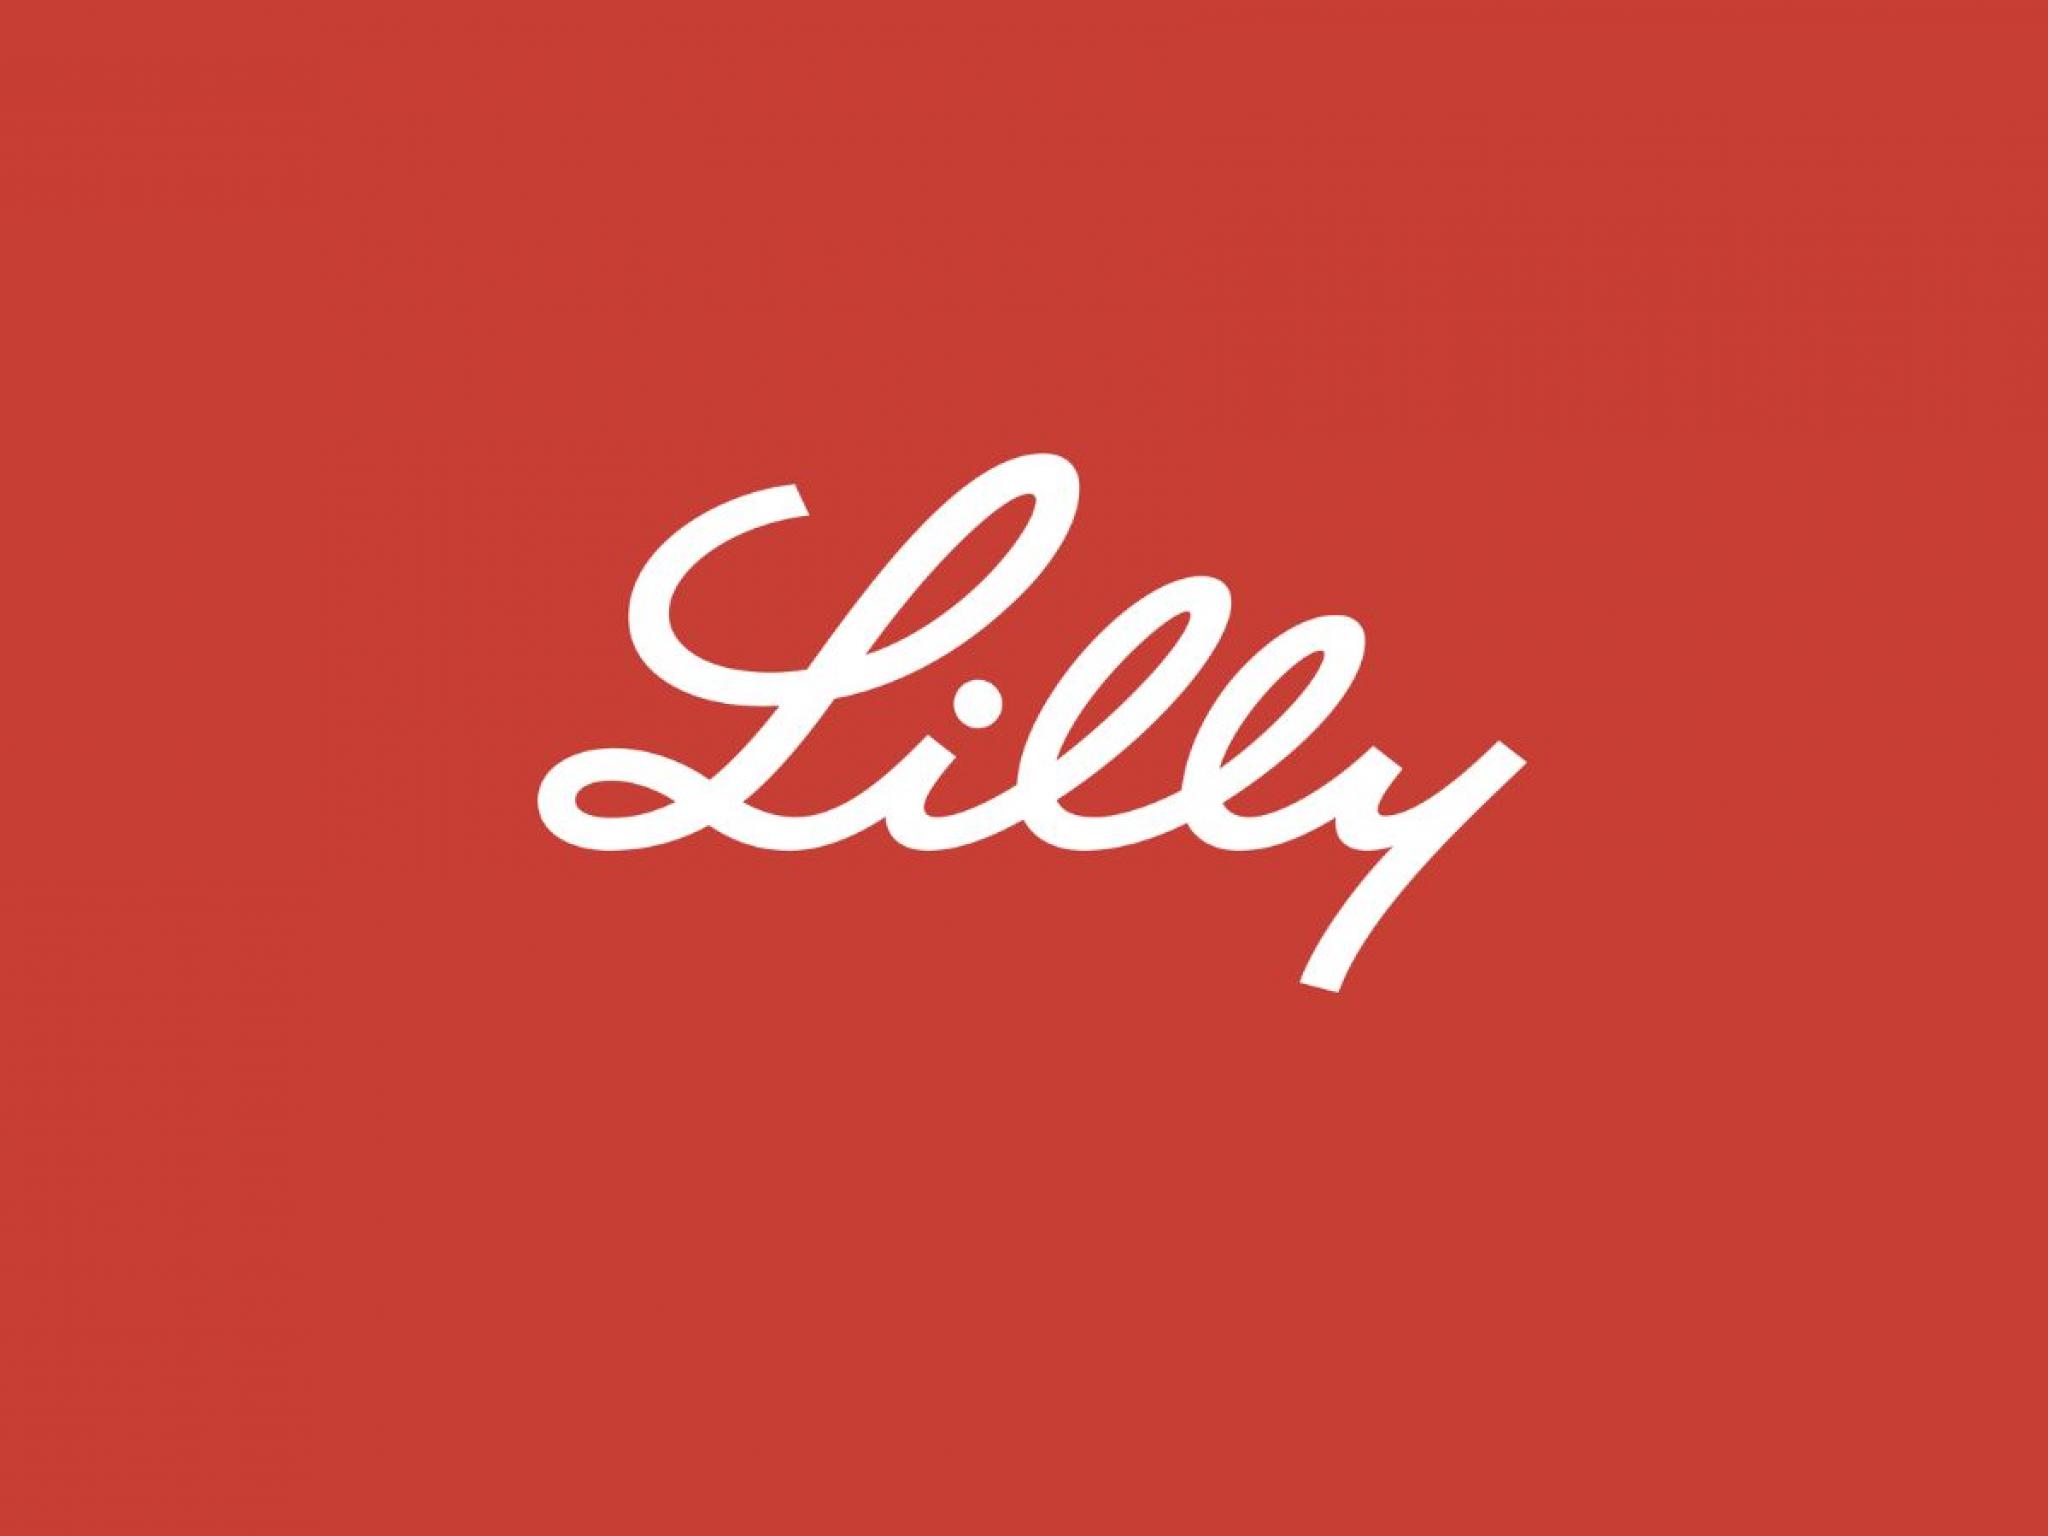  eli-lilly-livent-super-micro-computer-and-other-big-stocks-moving-higher-in-wednesdays-pre-market-session 